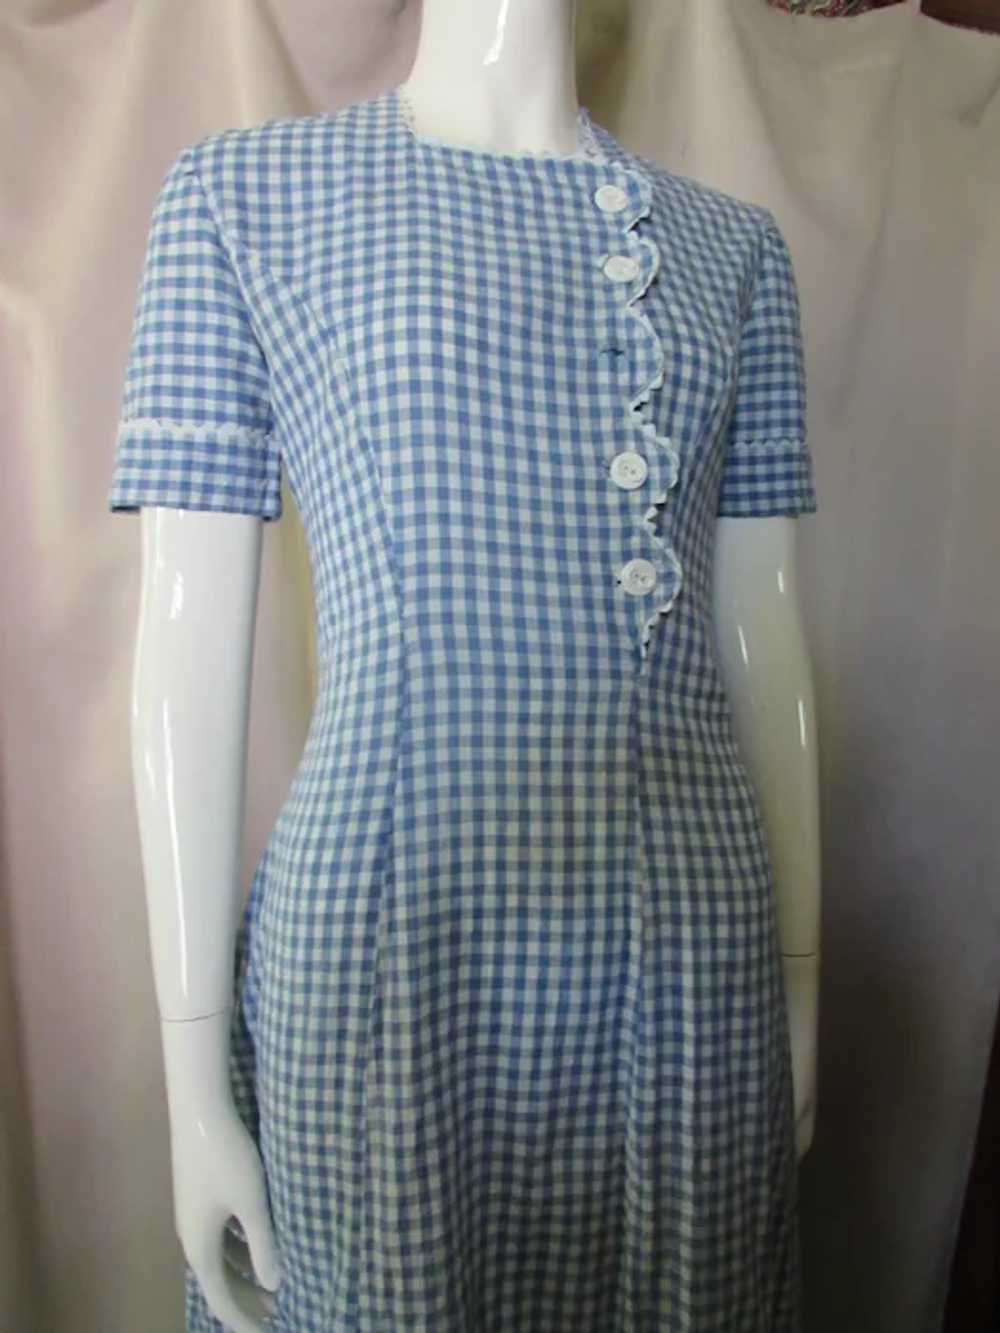 SALE Cutest Vintage Day Dress White & Blue Gingha… - image 3